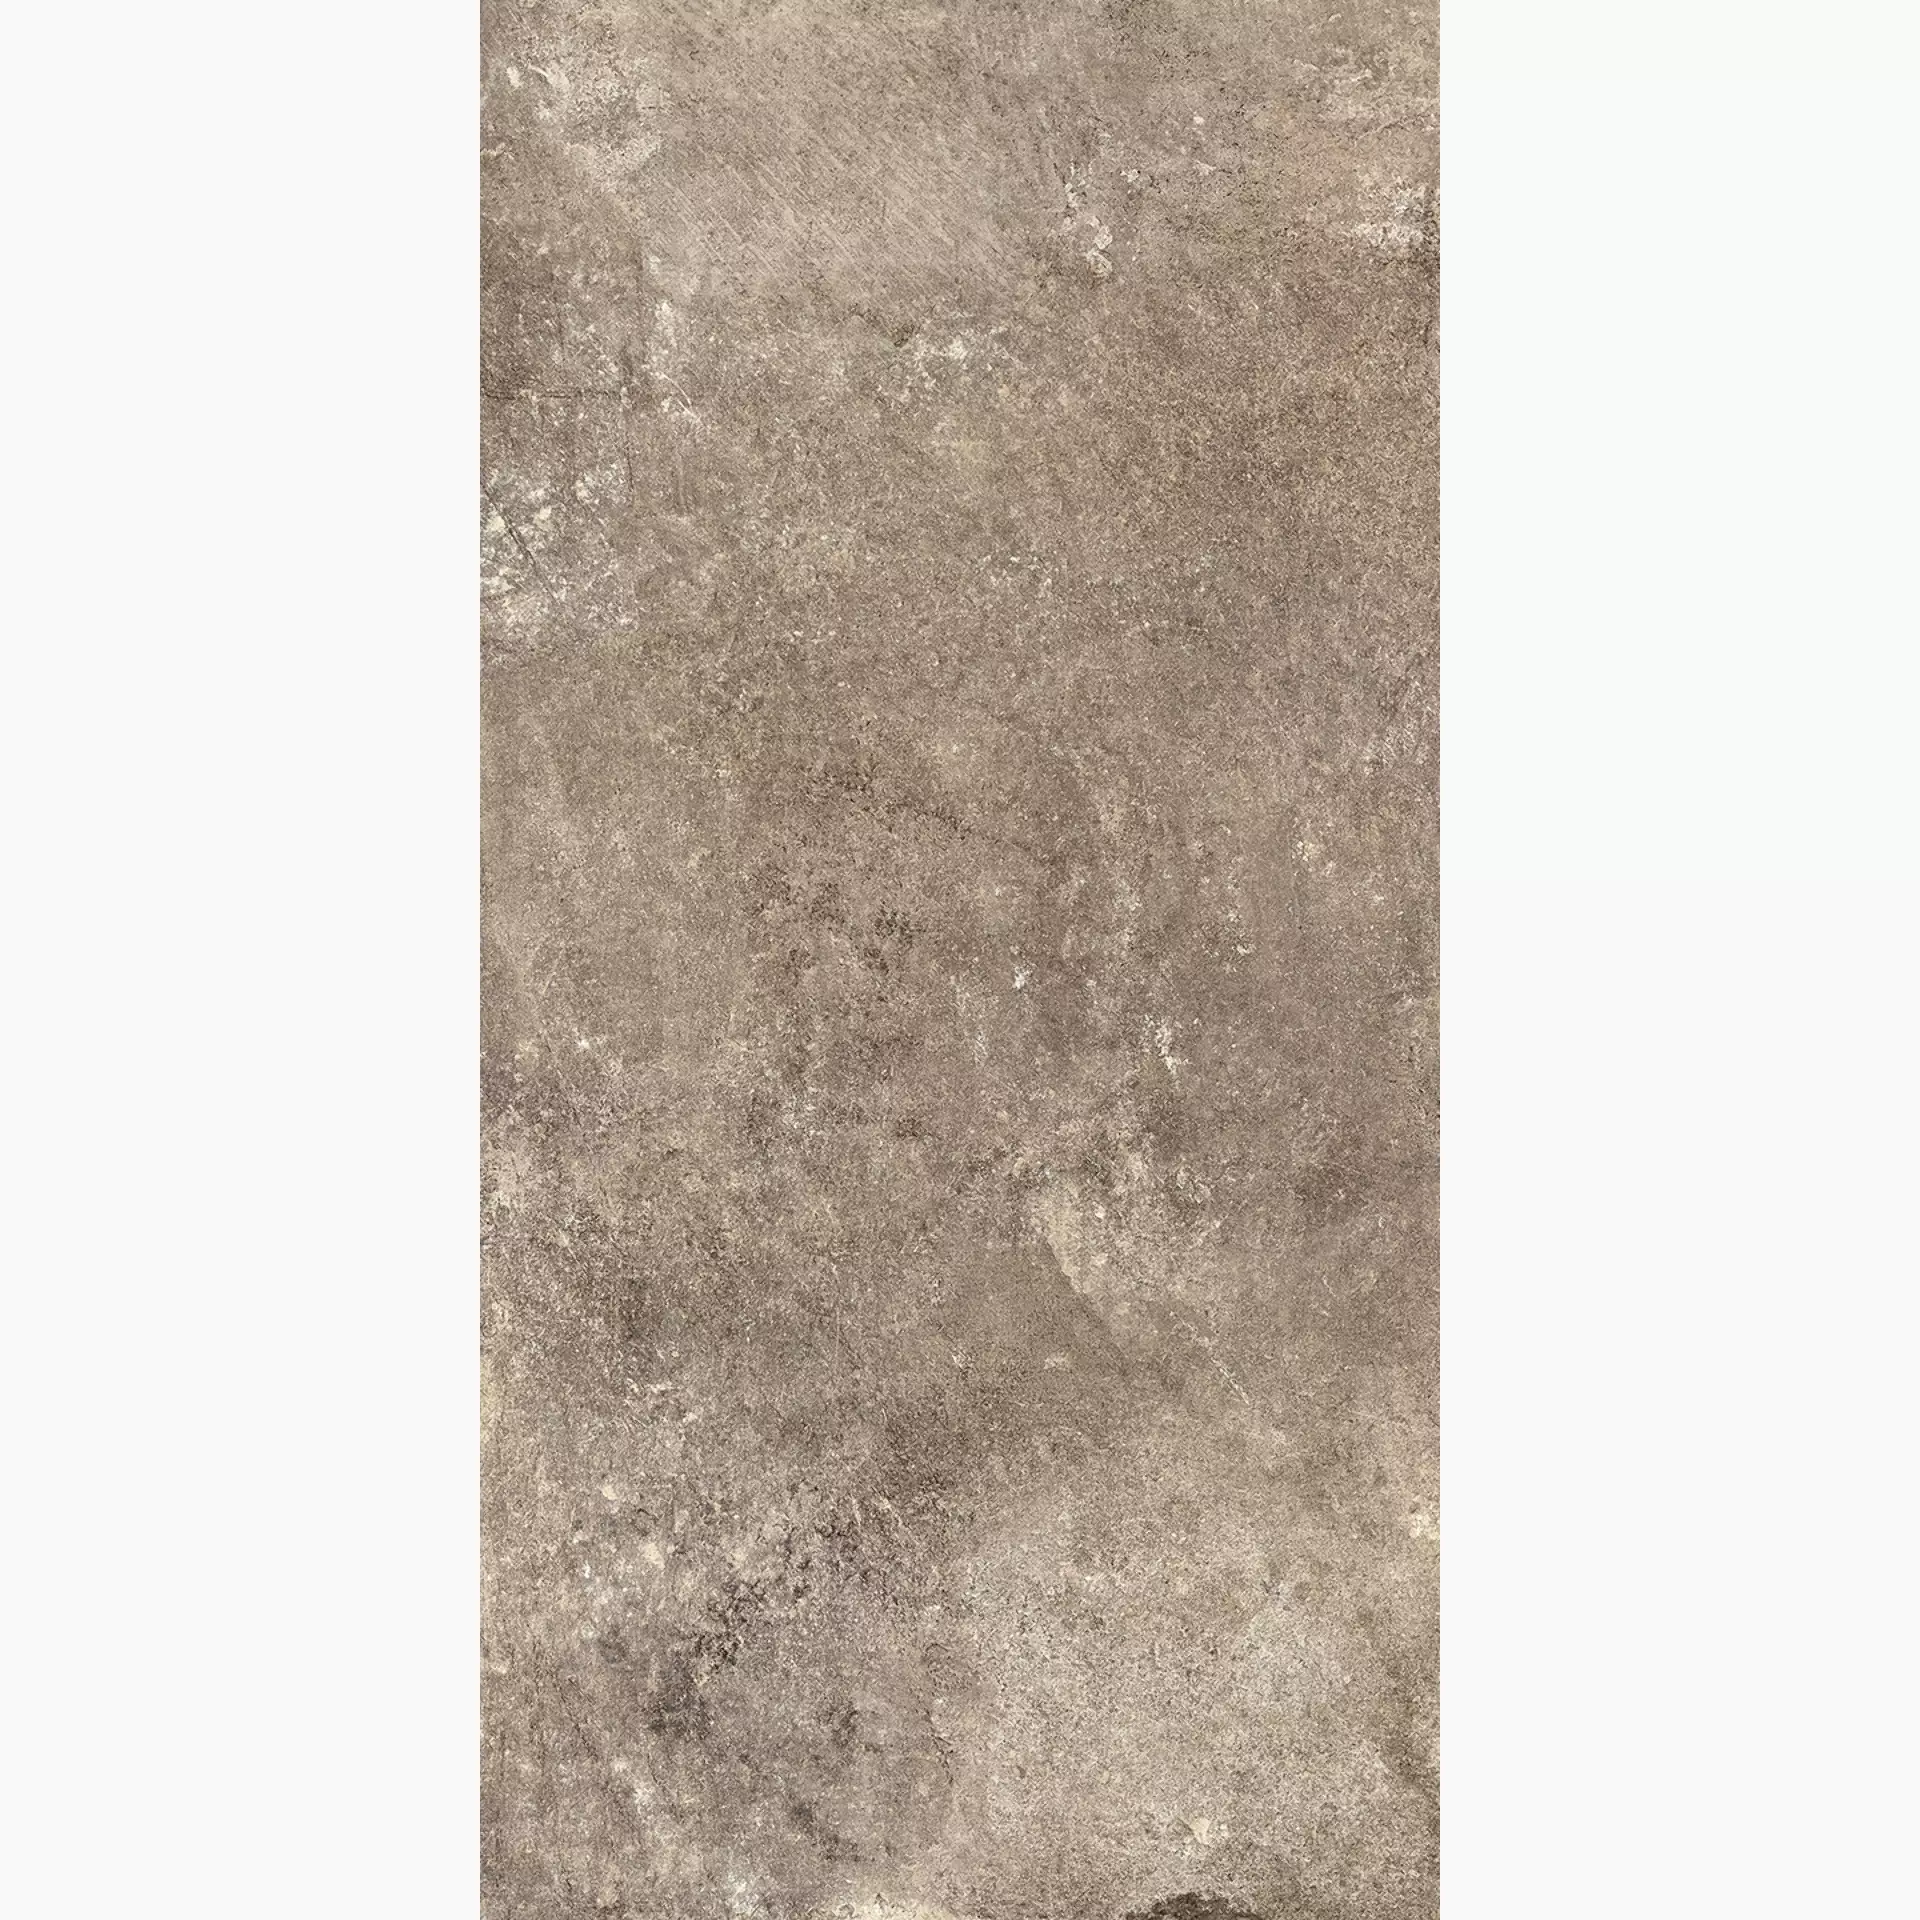 Fondovalle Reframe Taupe Natural REF090 60x120cm rectified 8,5mm